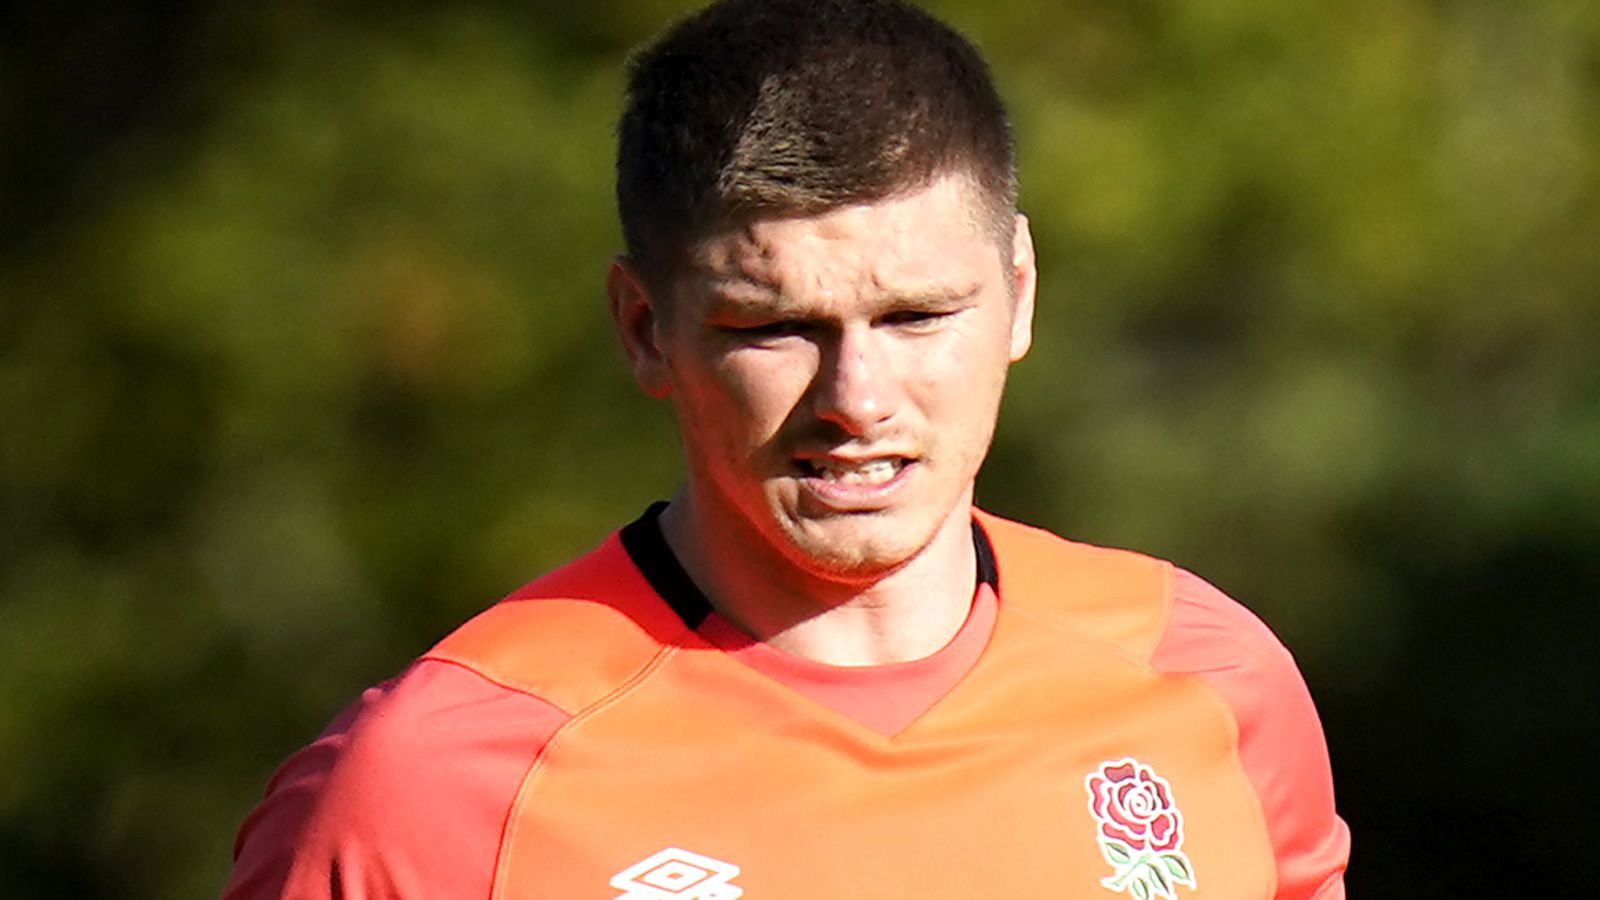 Owen Farrell: England captain back with squad after false positive Covid-19 test result